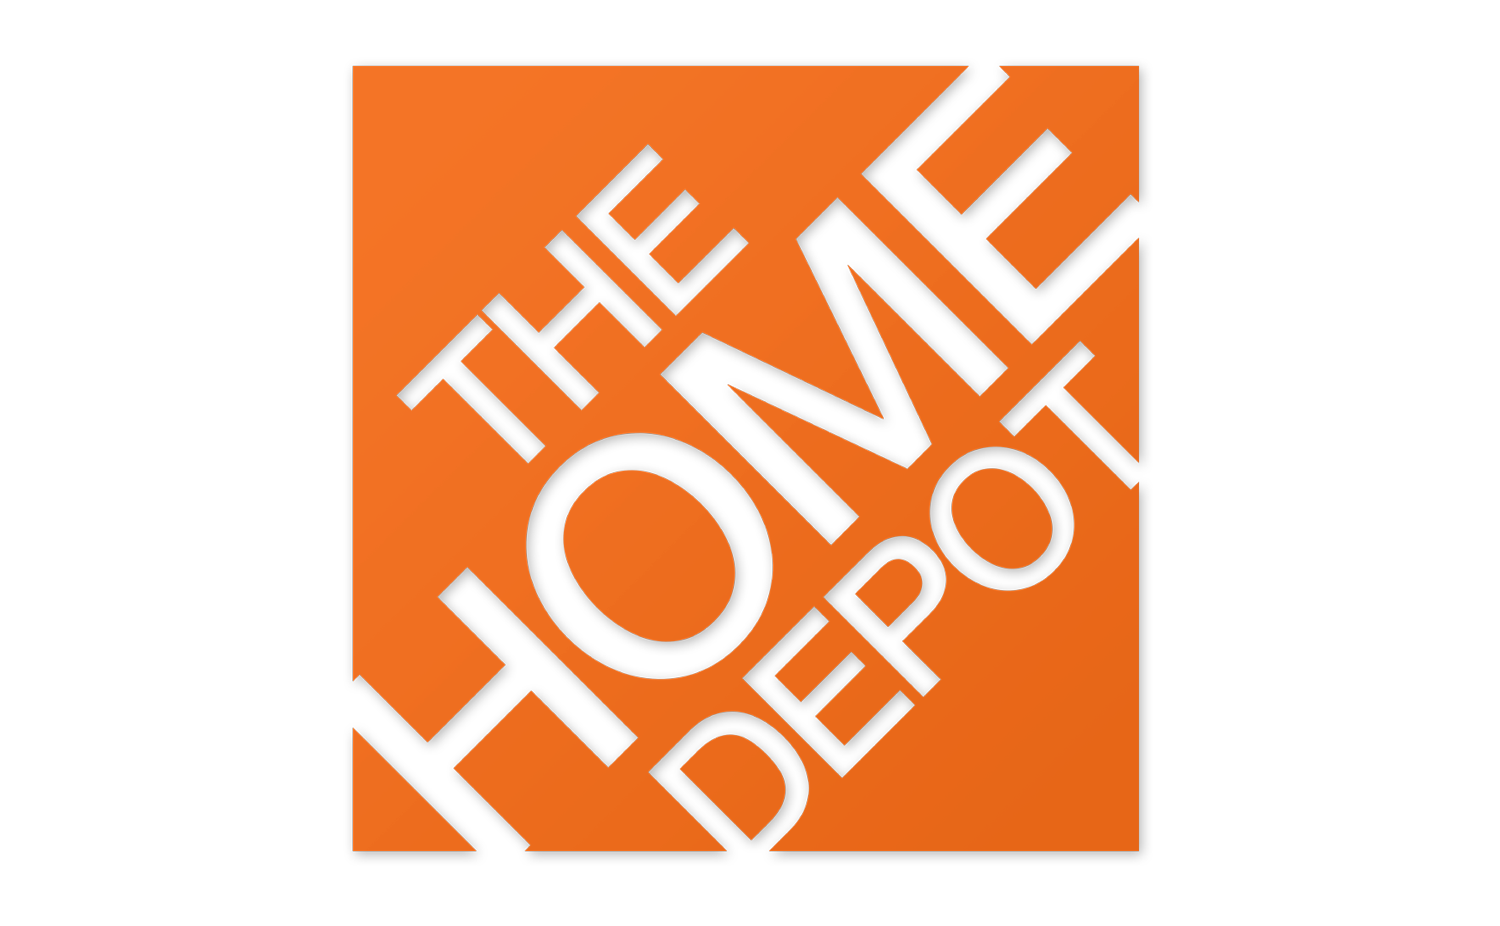 Home Depot For Words Ending With Brightest Digitaltalent With Pictures 